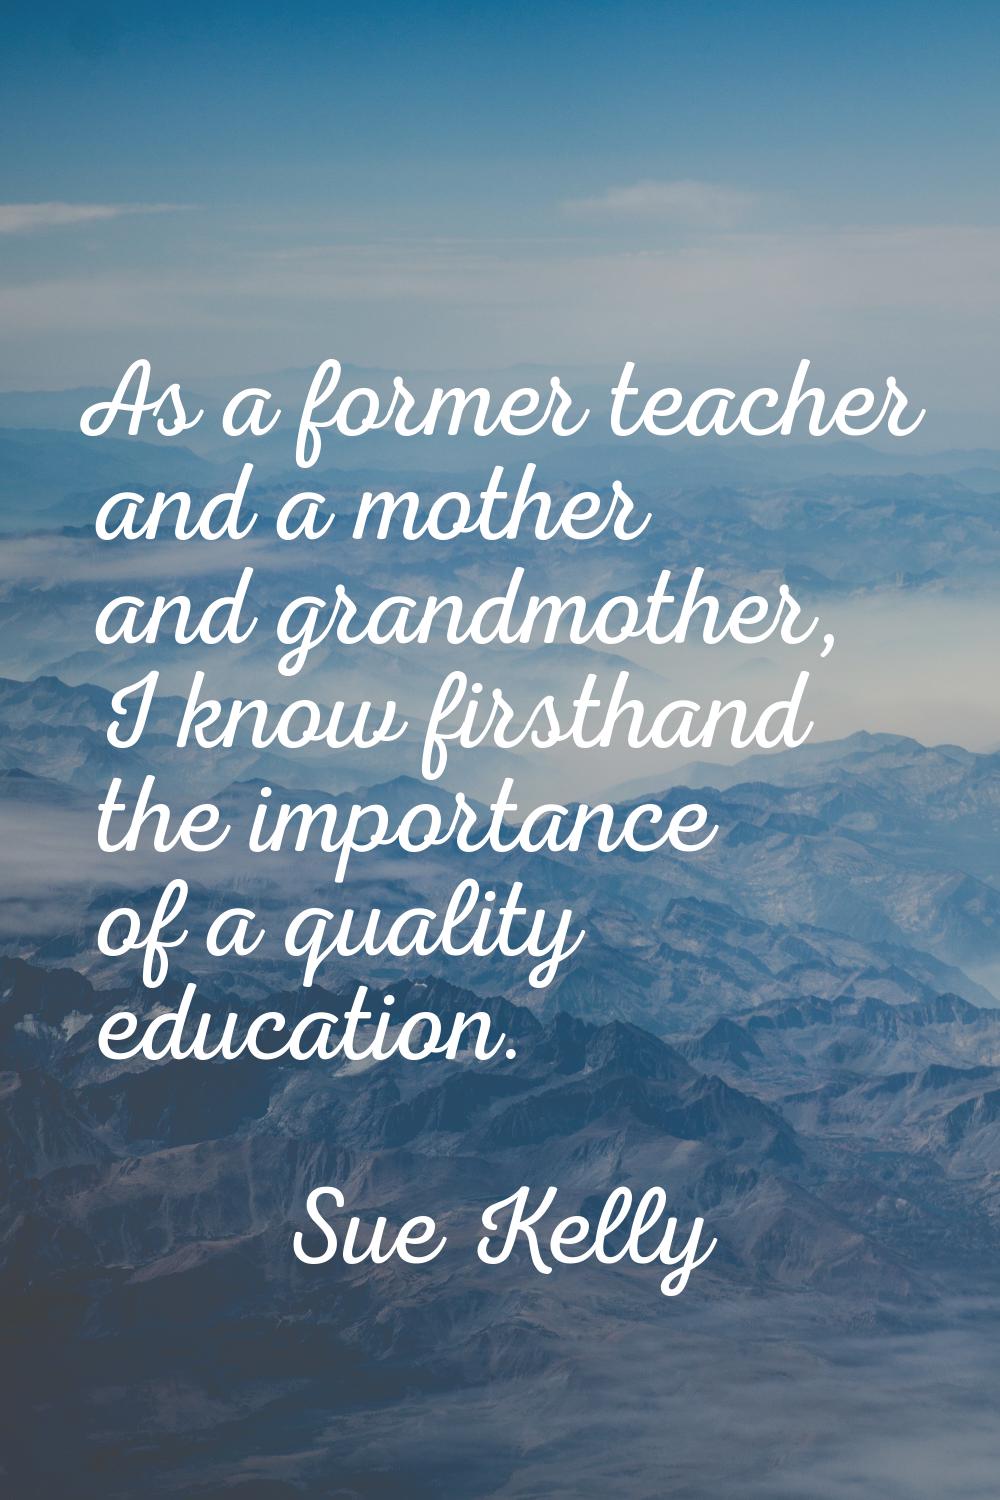 As a former teacher and a mother and grandmother, I know firsthand the importance of a quality educ